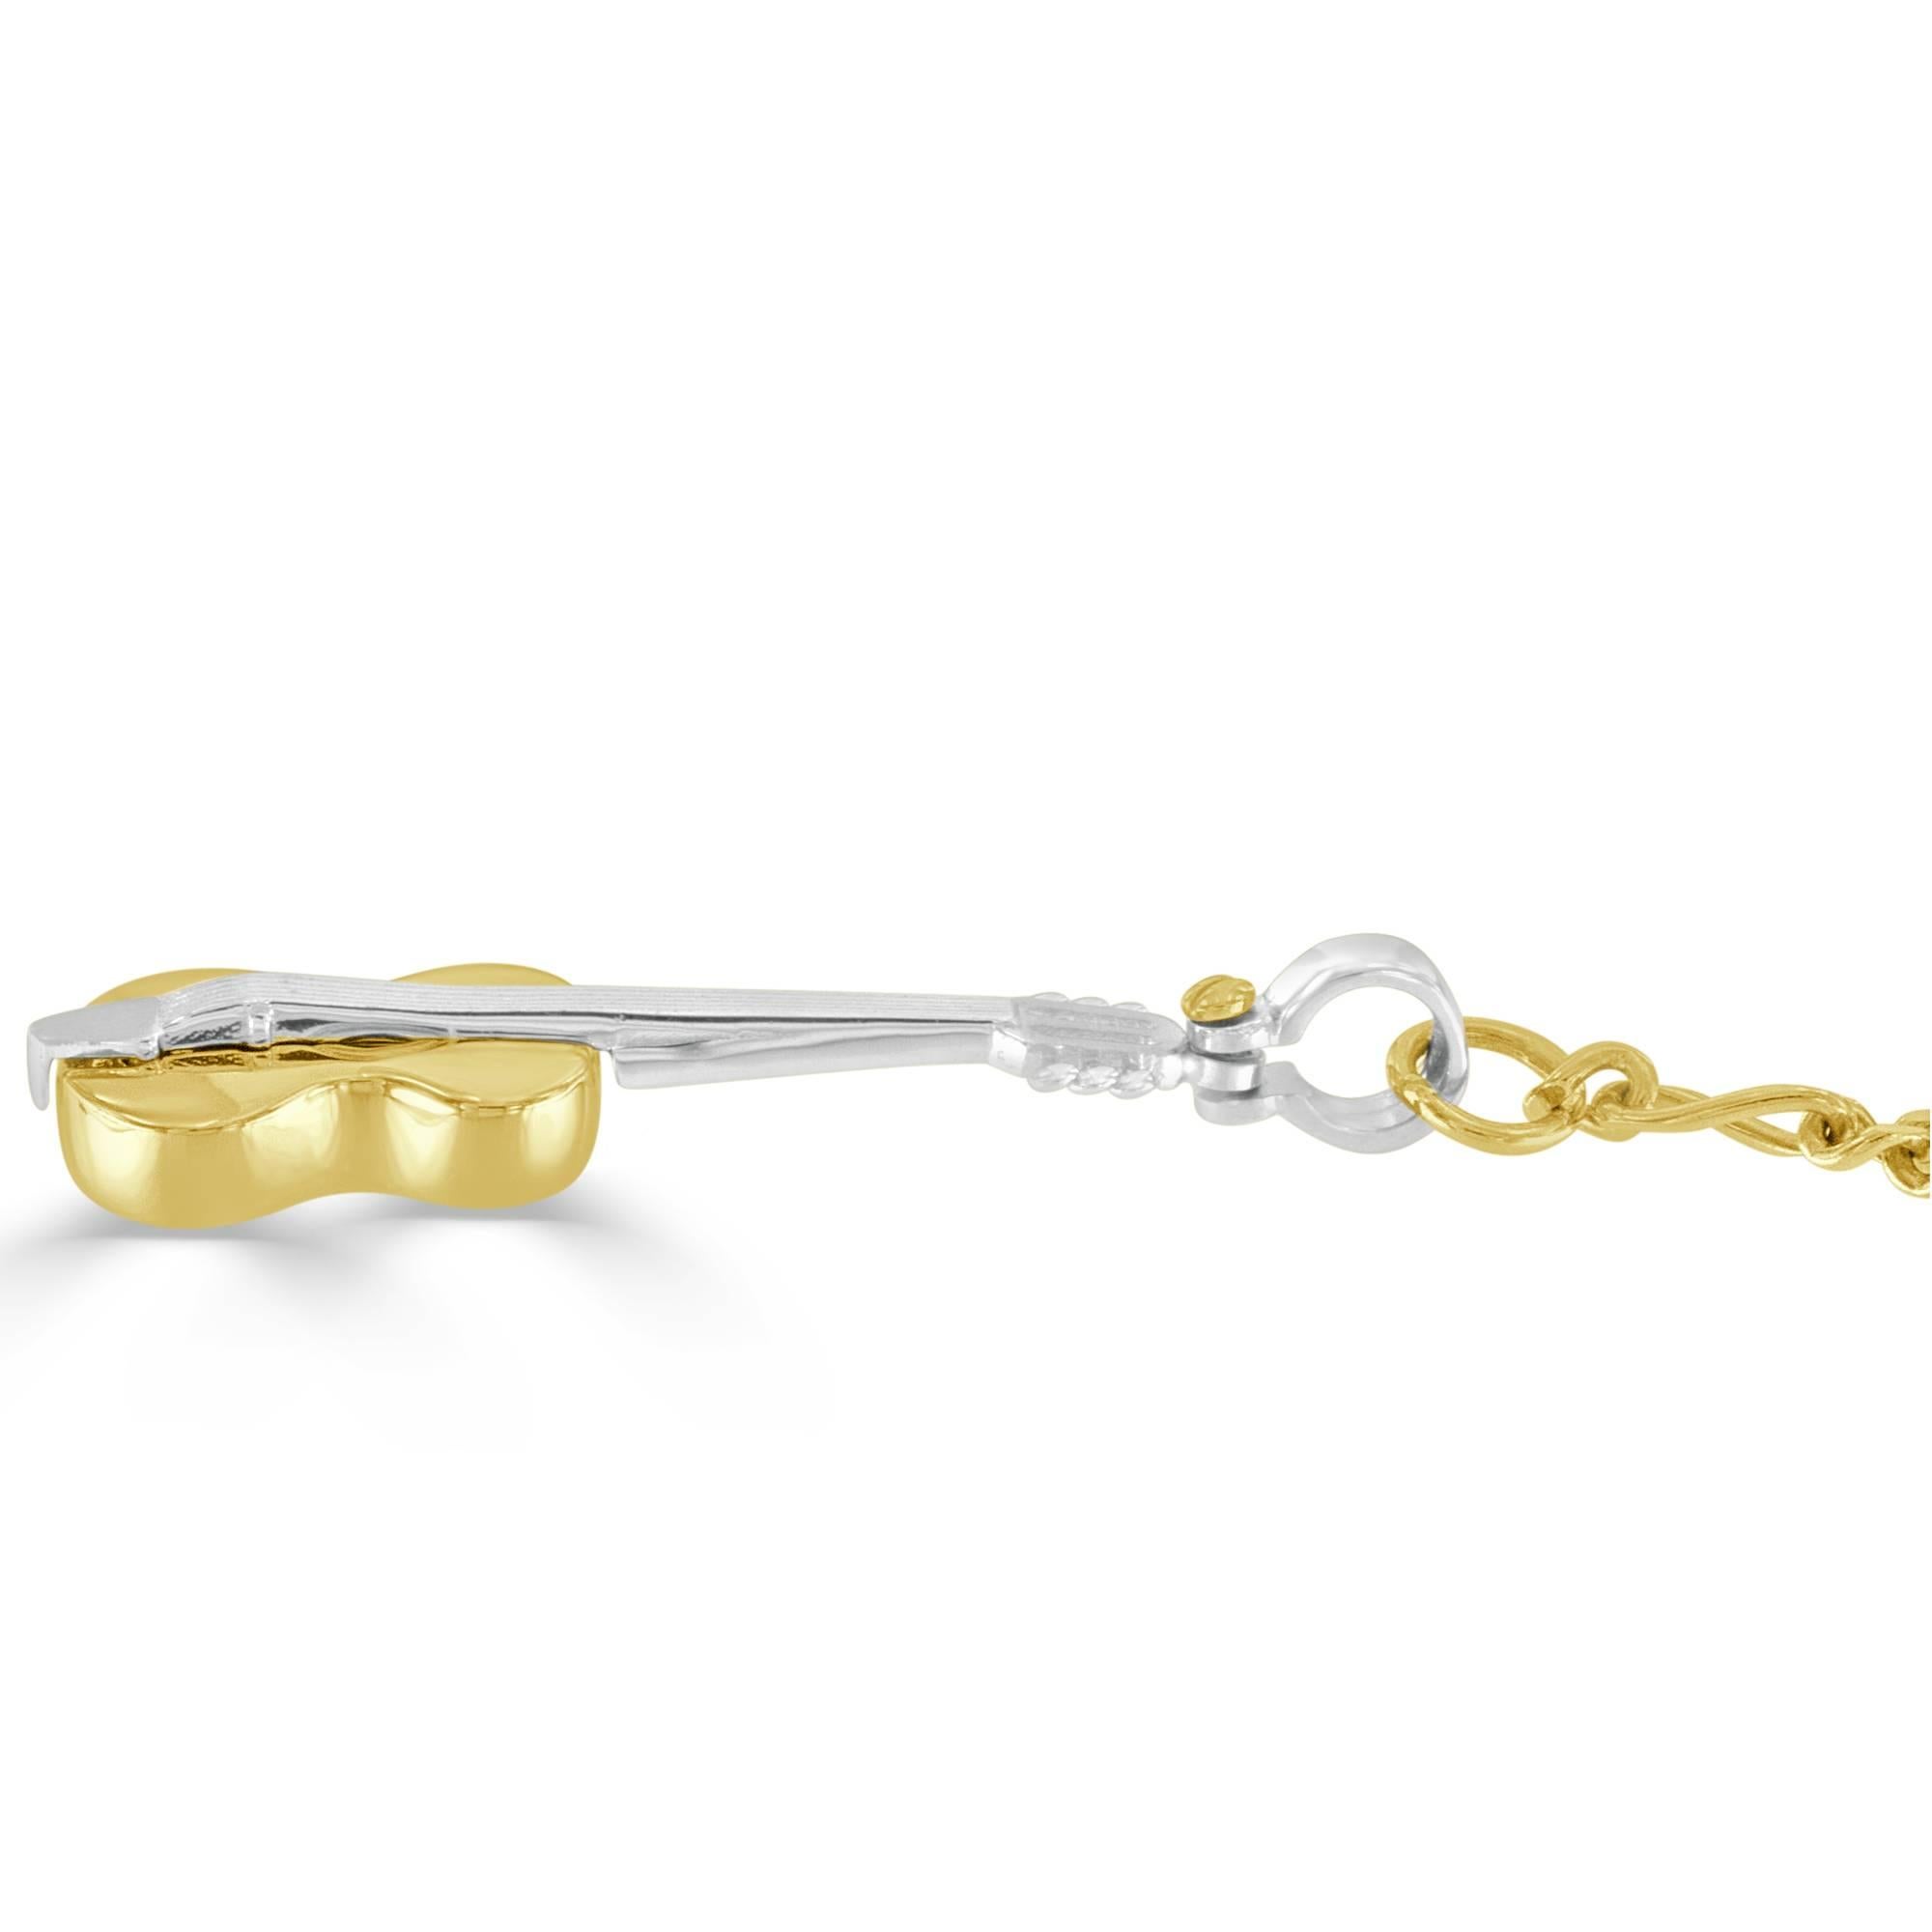 This musical themed key chain is a delight for any symphony patron! The 14 karat white and yellow gold violin measures 1.50 inches in length and 0.50 inch in width, the entirety of the key chain measuring 4.50 inches in length (one inch 14k key